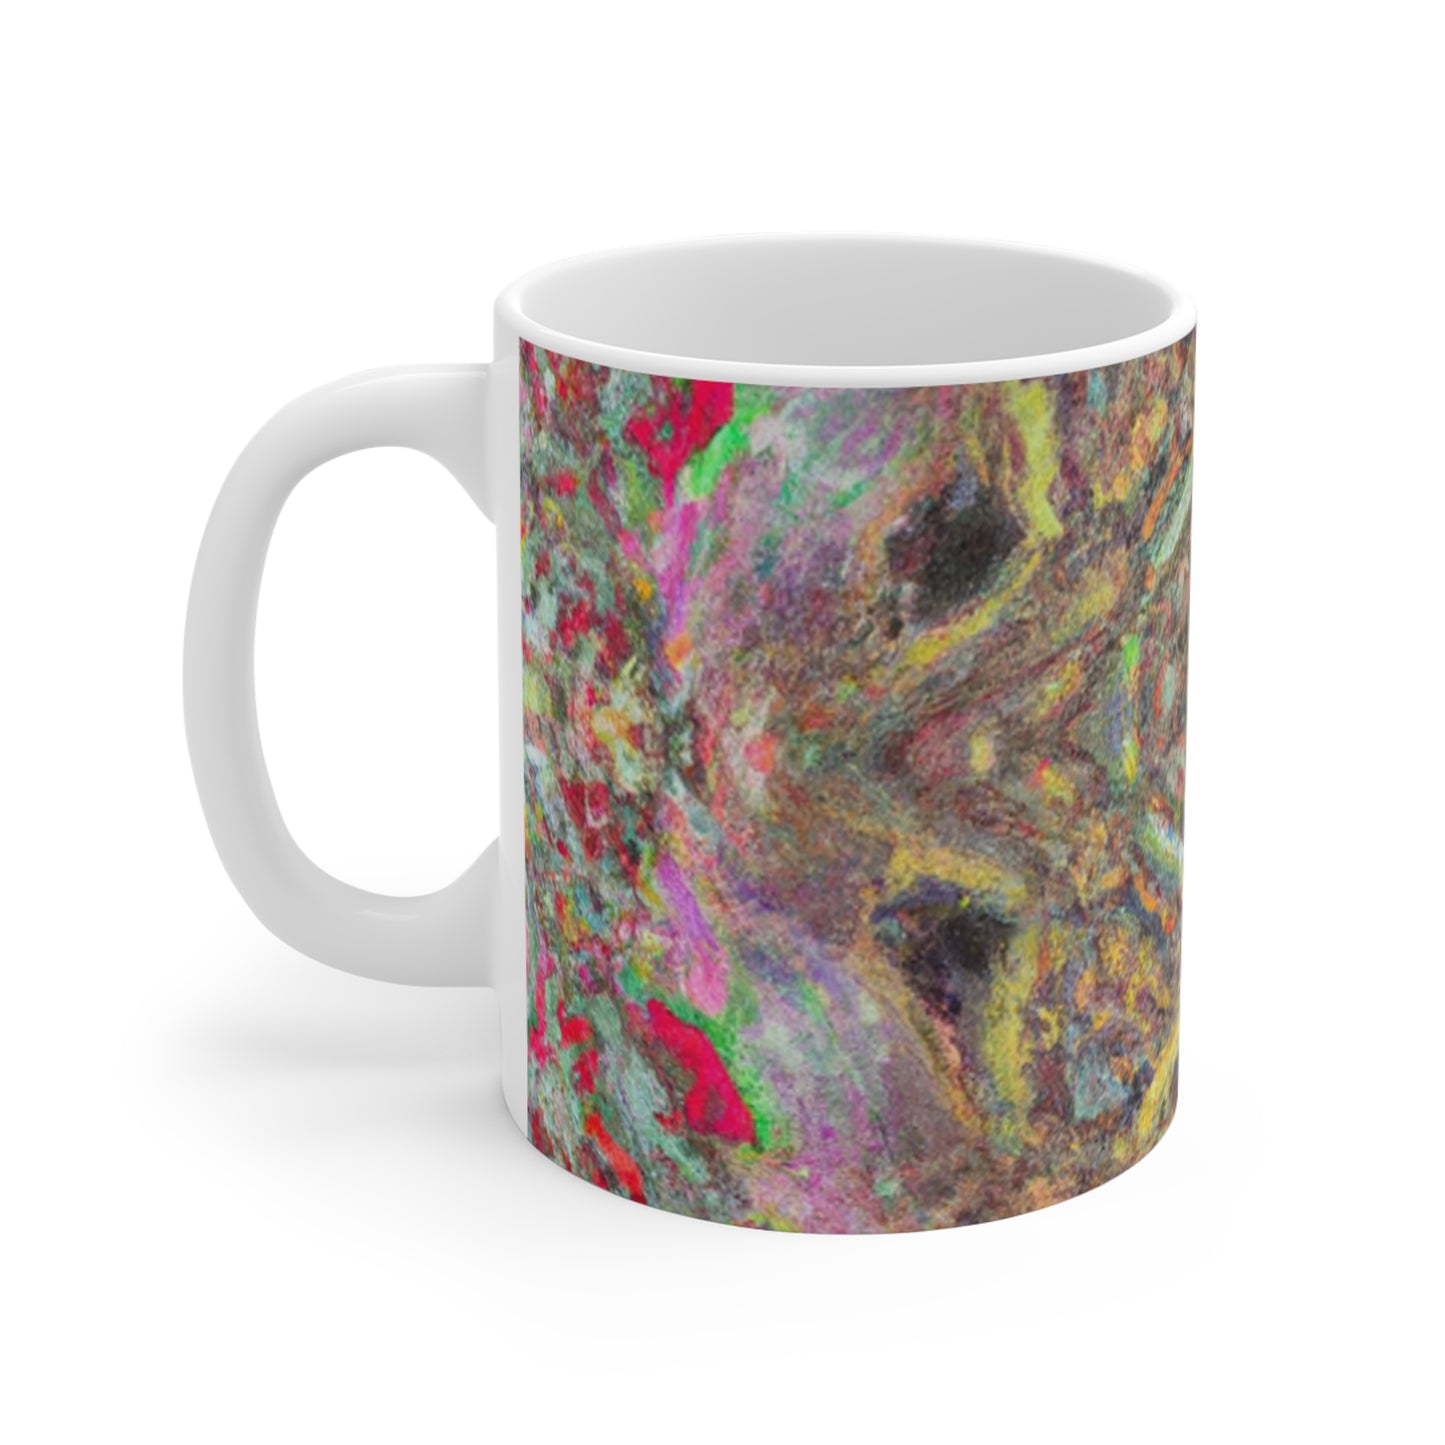 Nel's Classic Coffee - Psychedelic Coffee Cup Mug 11 Ounce